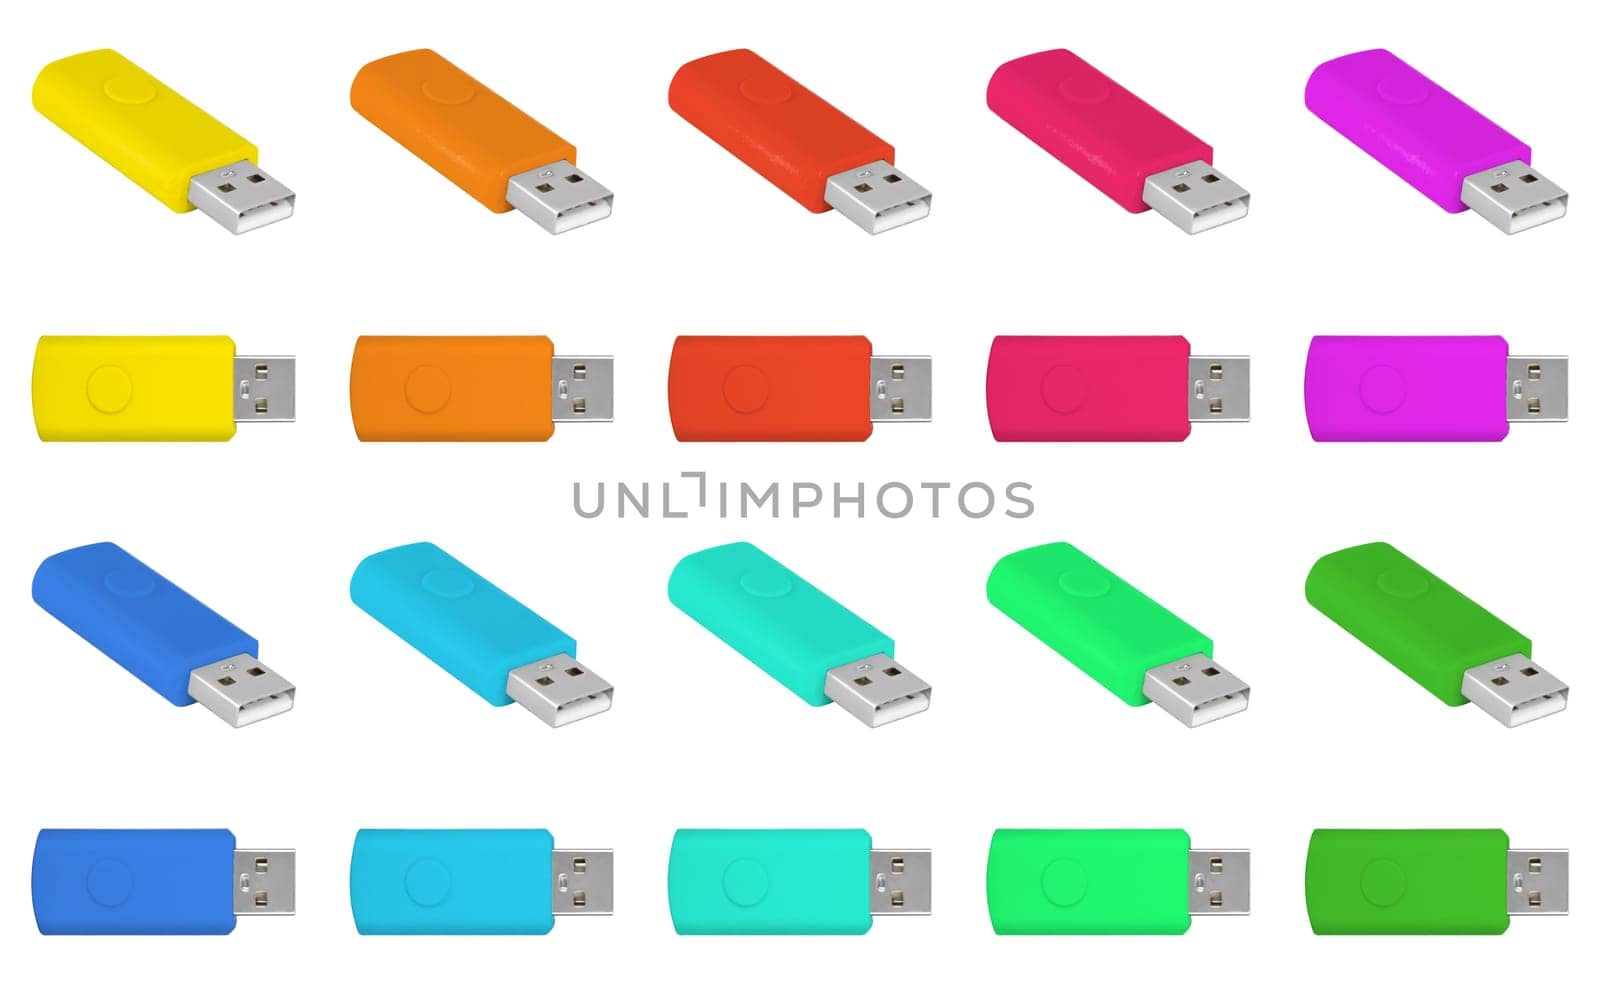 USB flash drive, external drive, on a white background in isolation